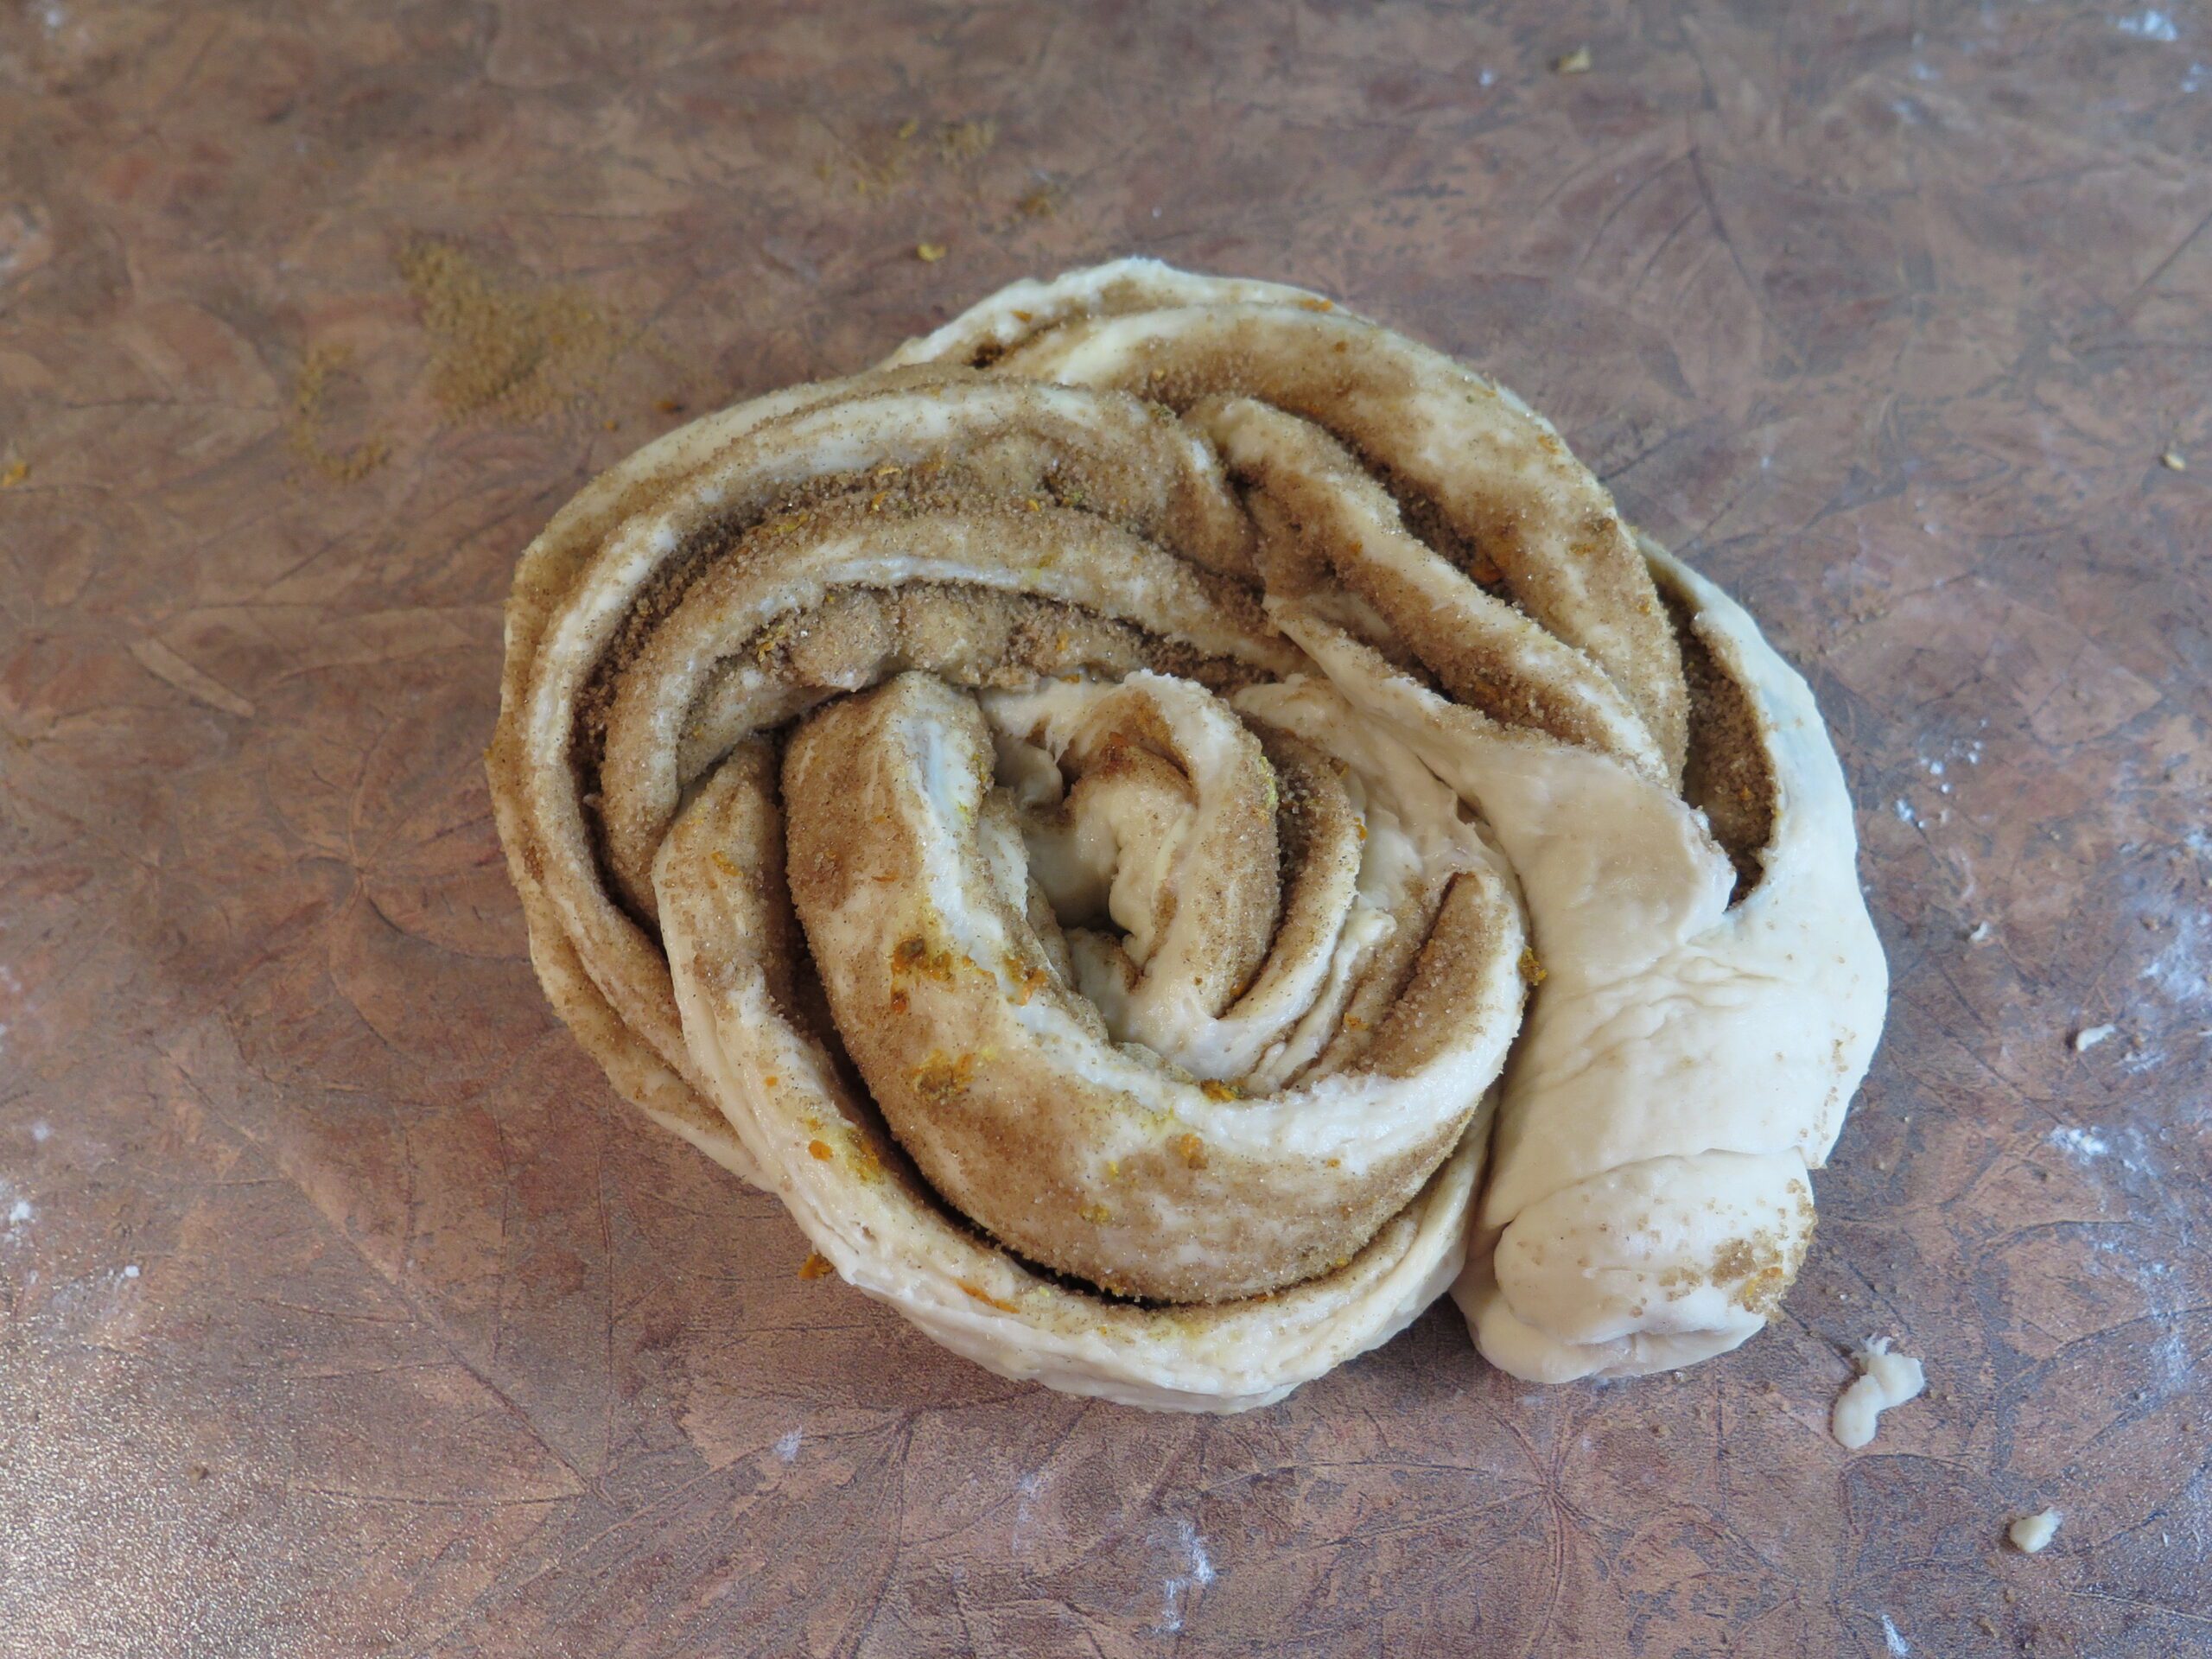 Twisted dough coiled into a circle